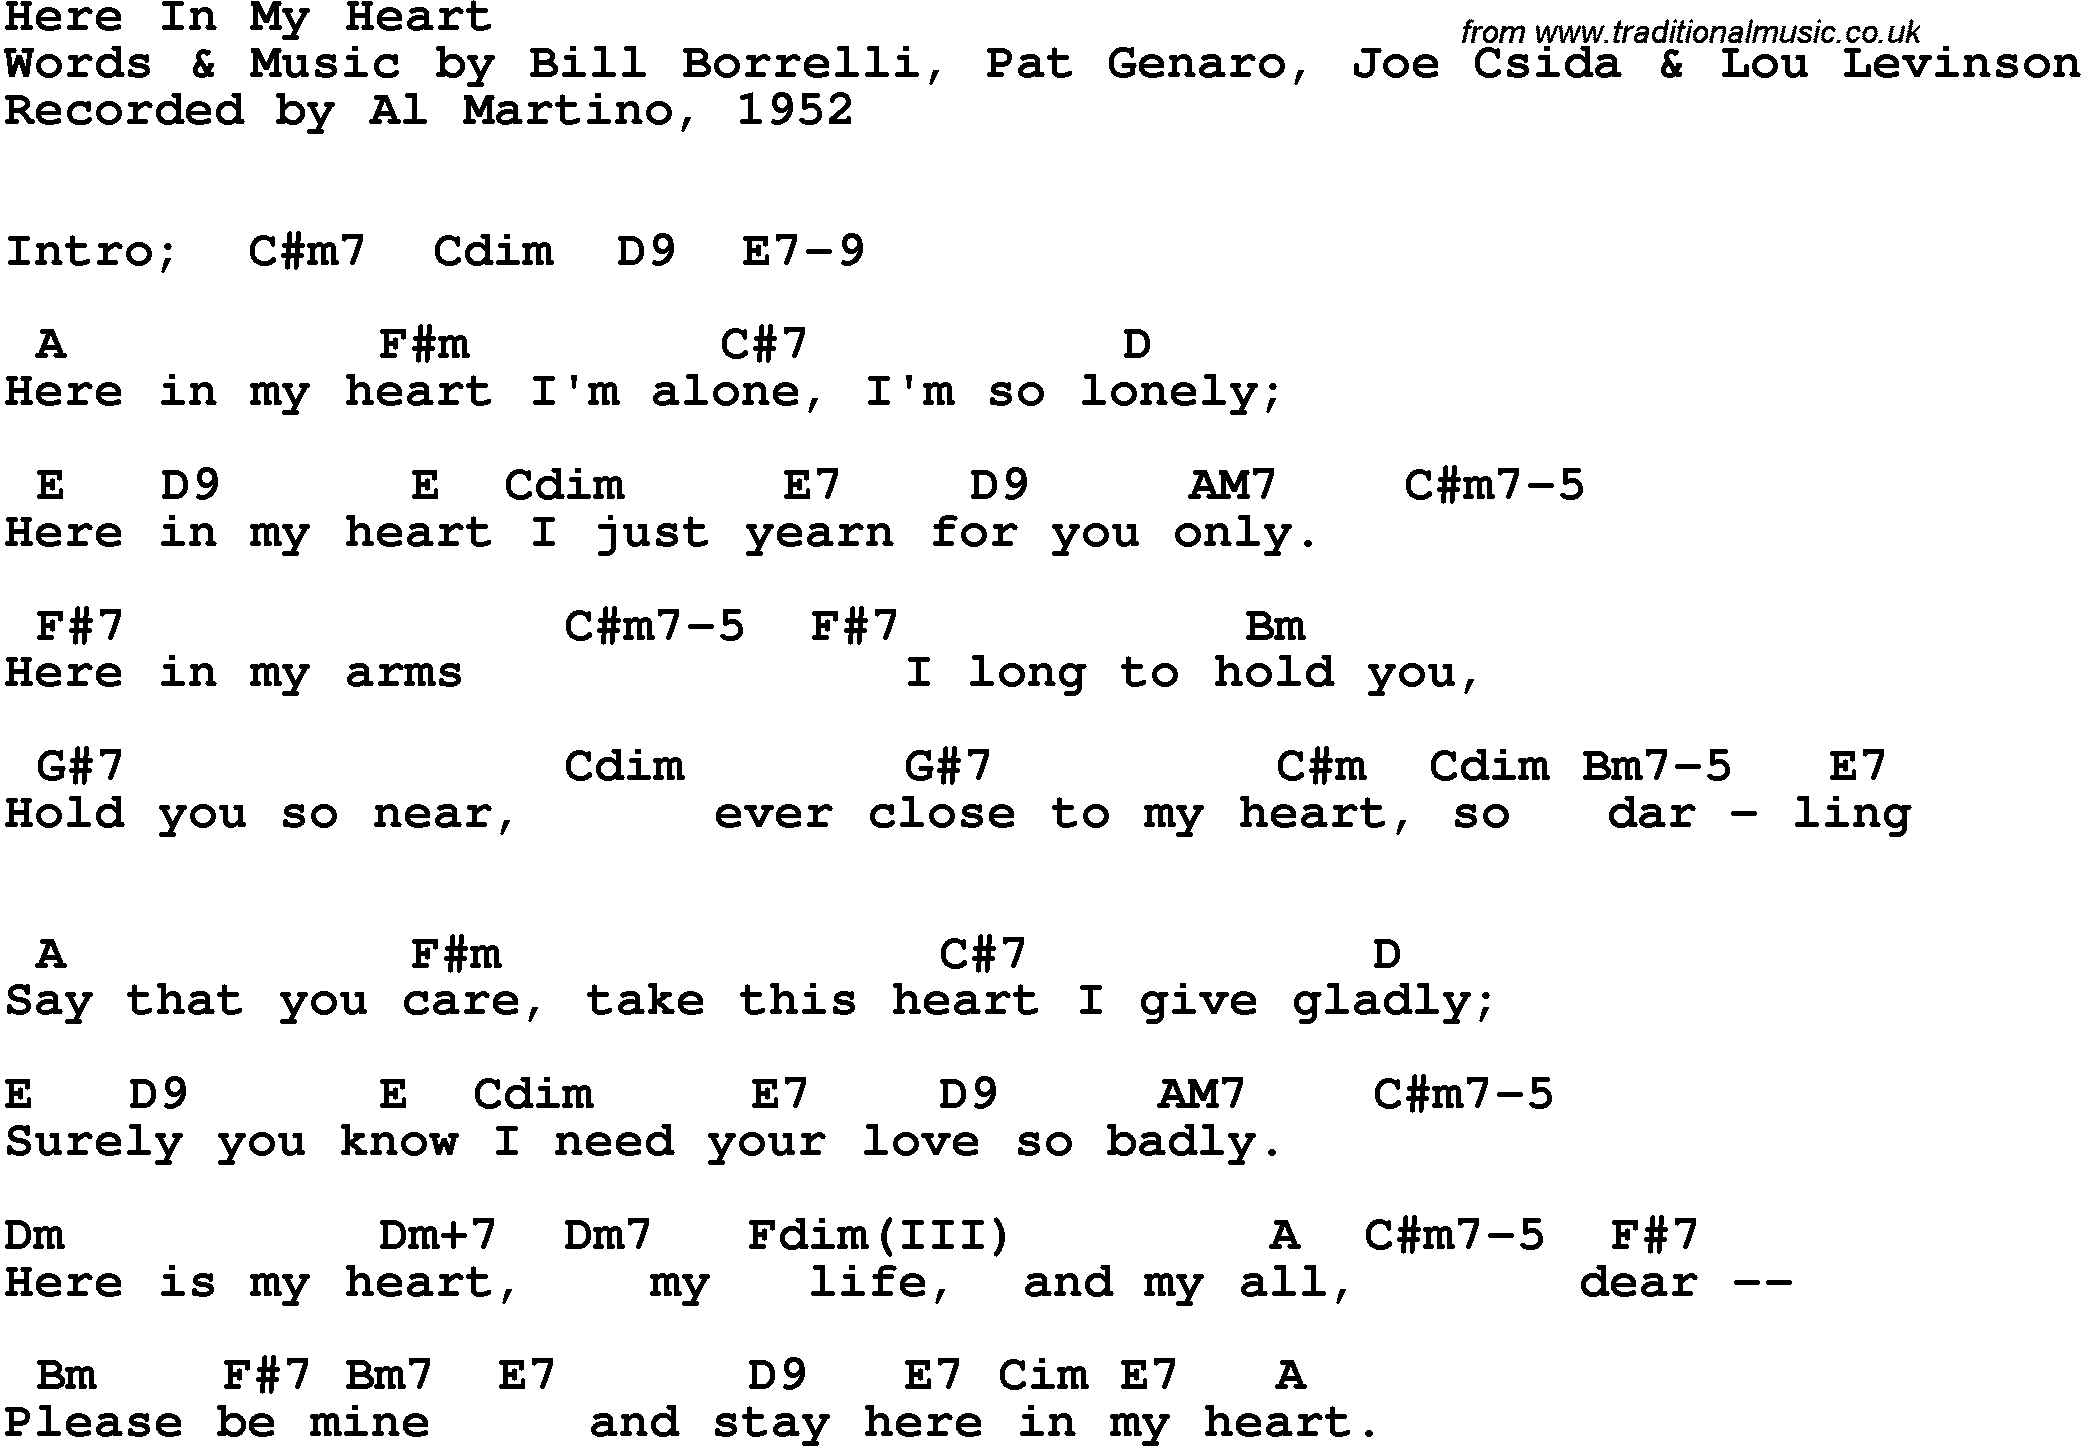 Song Lyrics with guitar chords for Here In My Heart - Al Martino, 1952